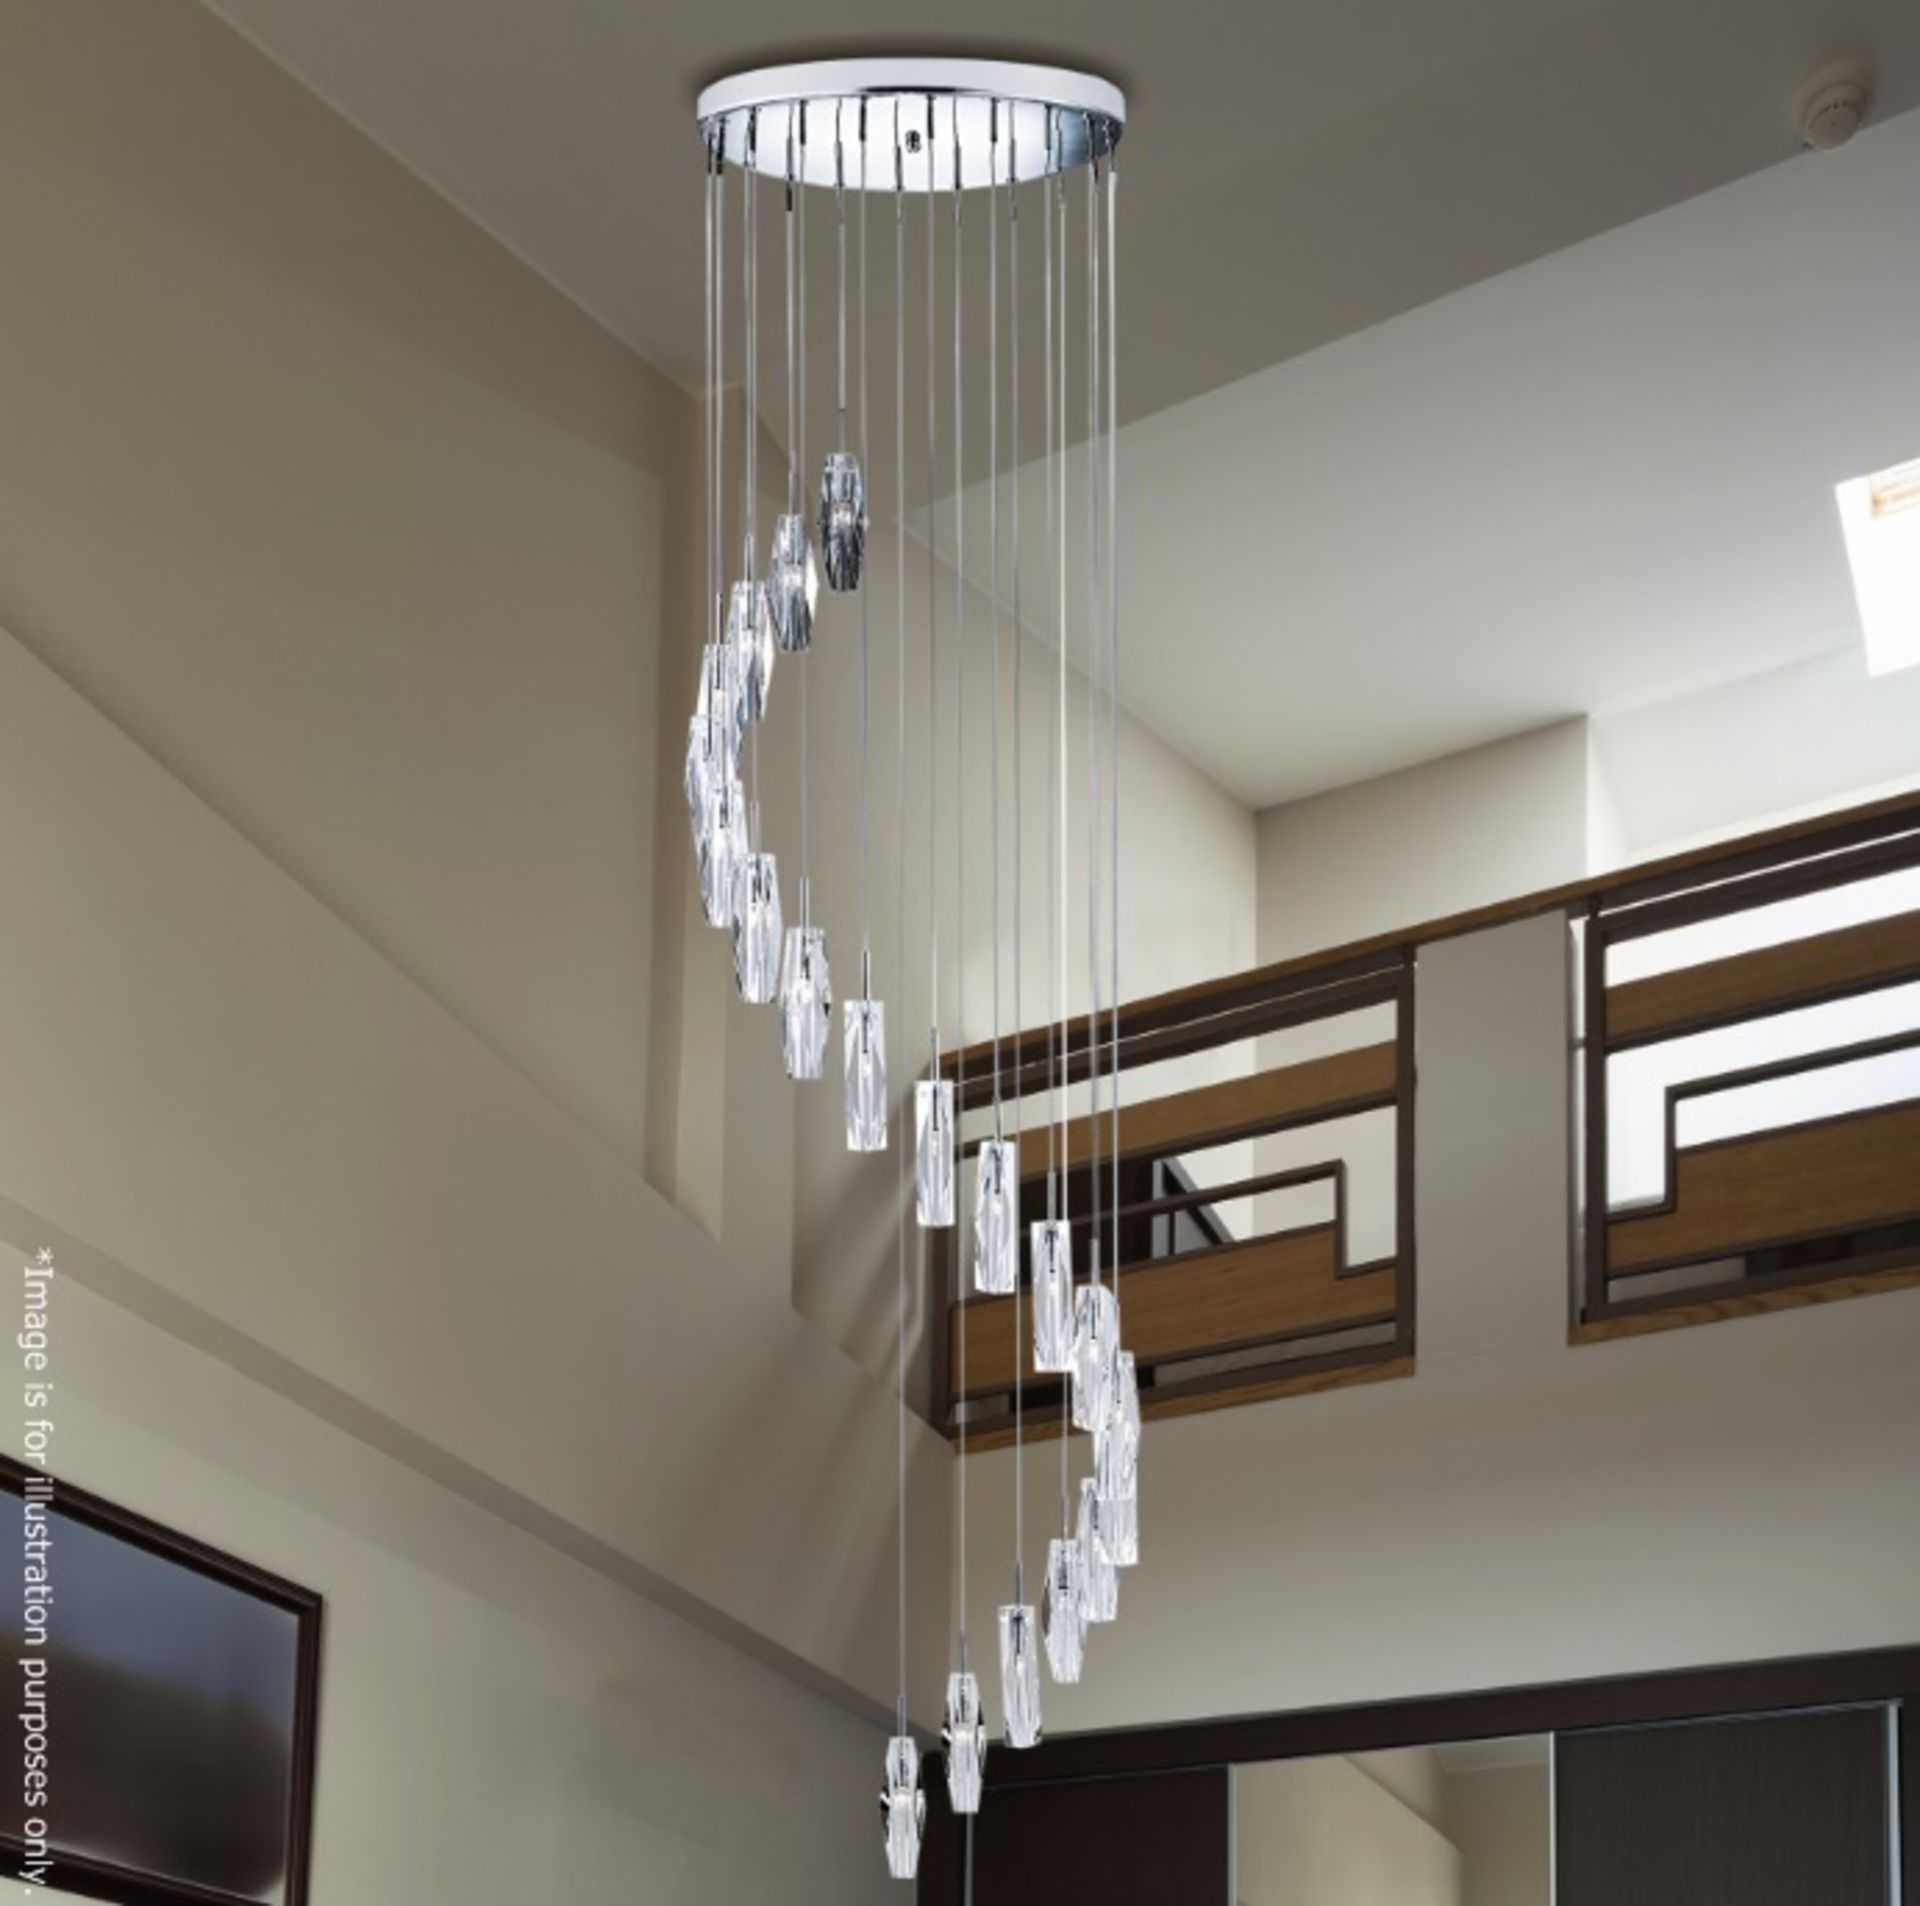 1 x Sculptured Ice Chrome 20 Light Dingle Dangle Pendant With Crystal Glass - RRP £792.00